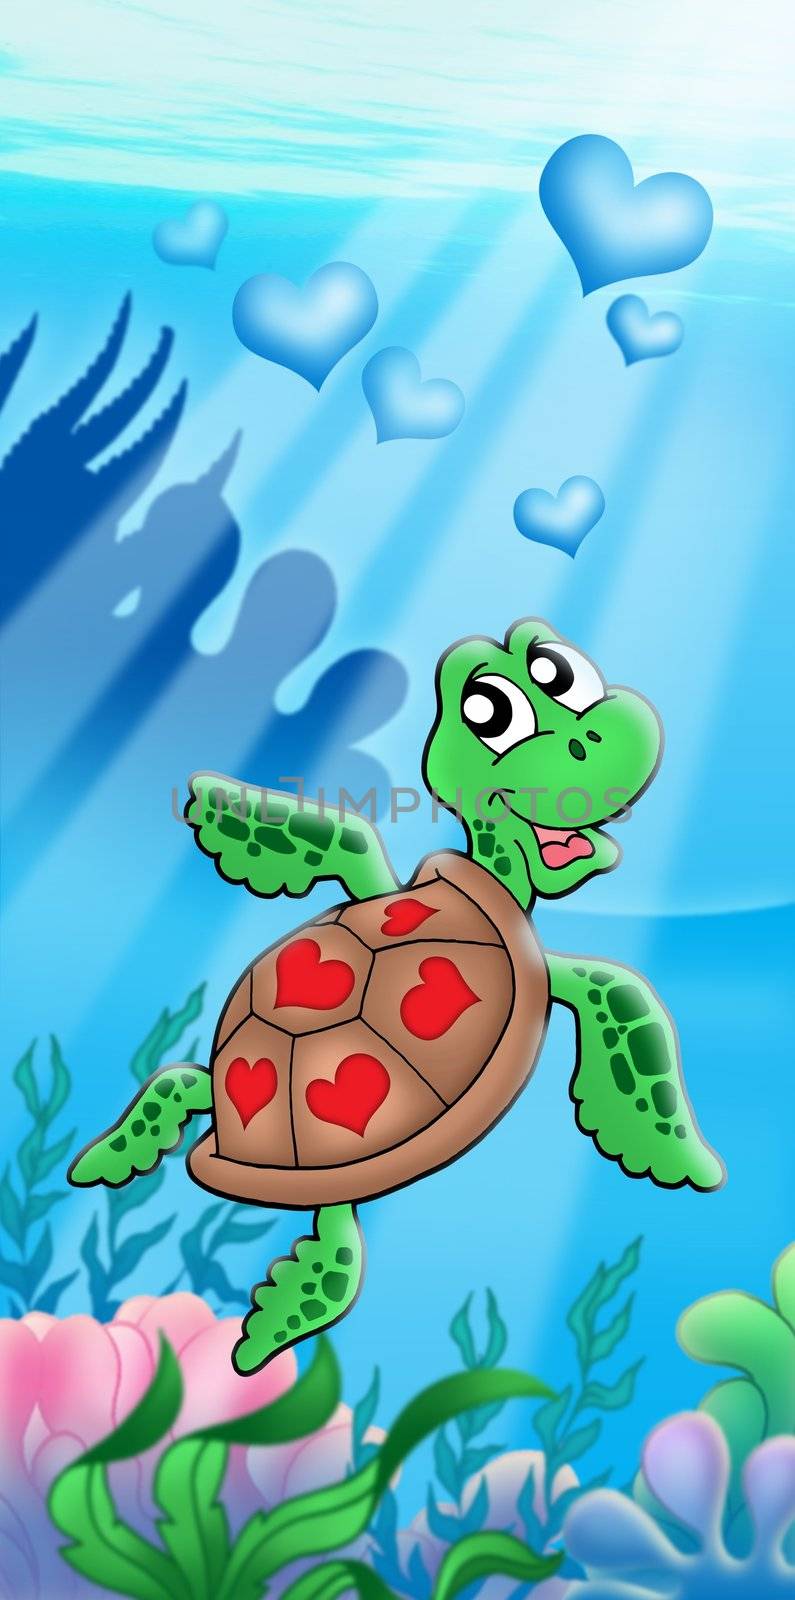 Sea turtle with hearts - color illustration.